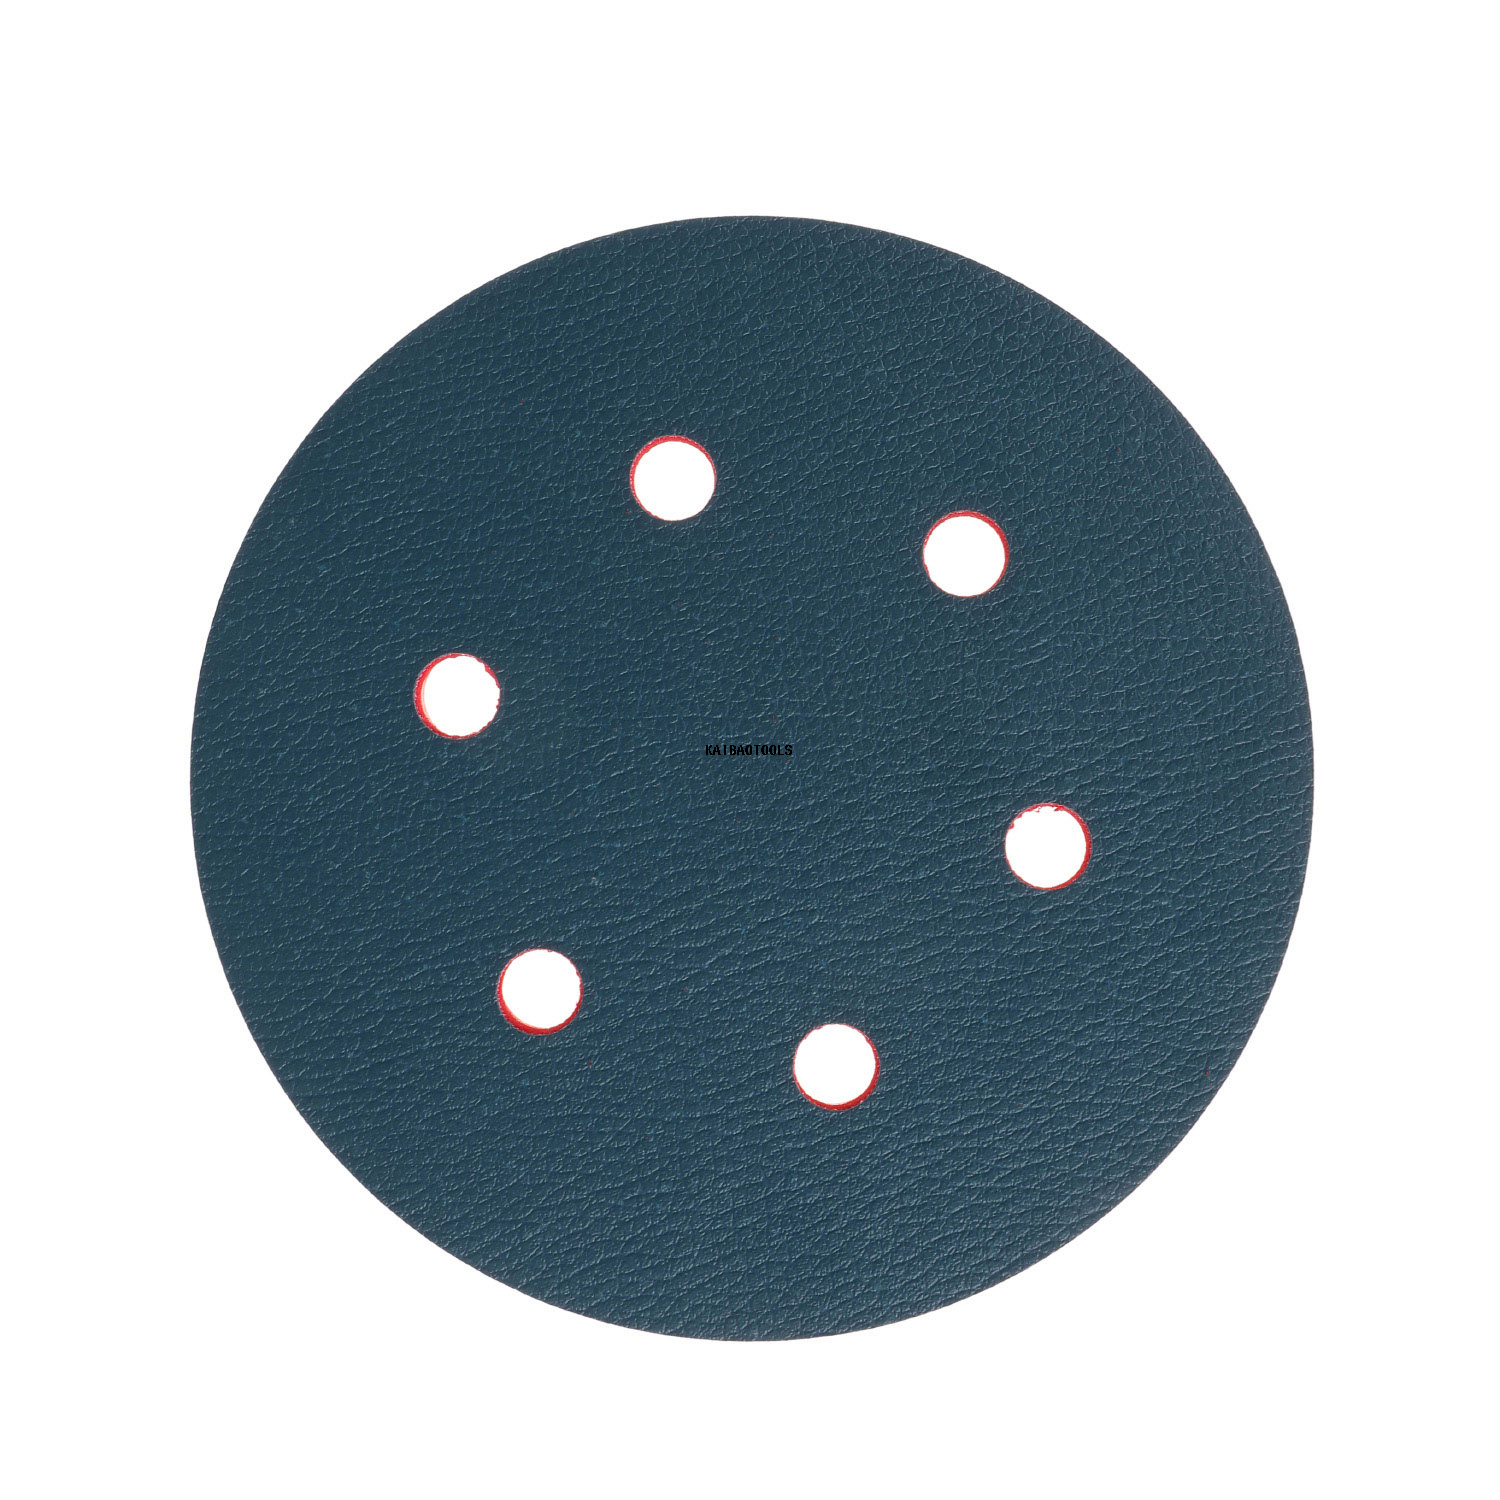 5 Inch 12000RPM Dual Action Random Orbital Sanding Pad with Smooth Surface for Air Polishing